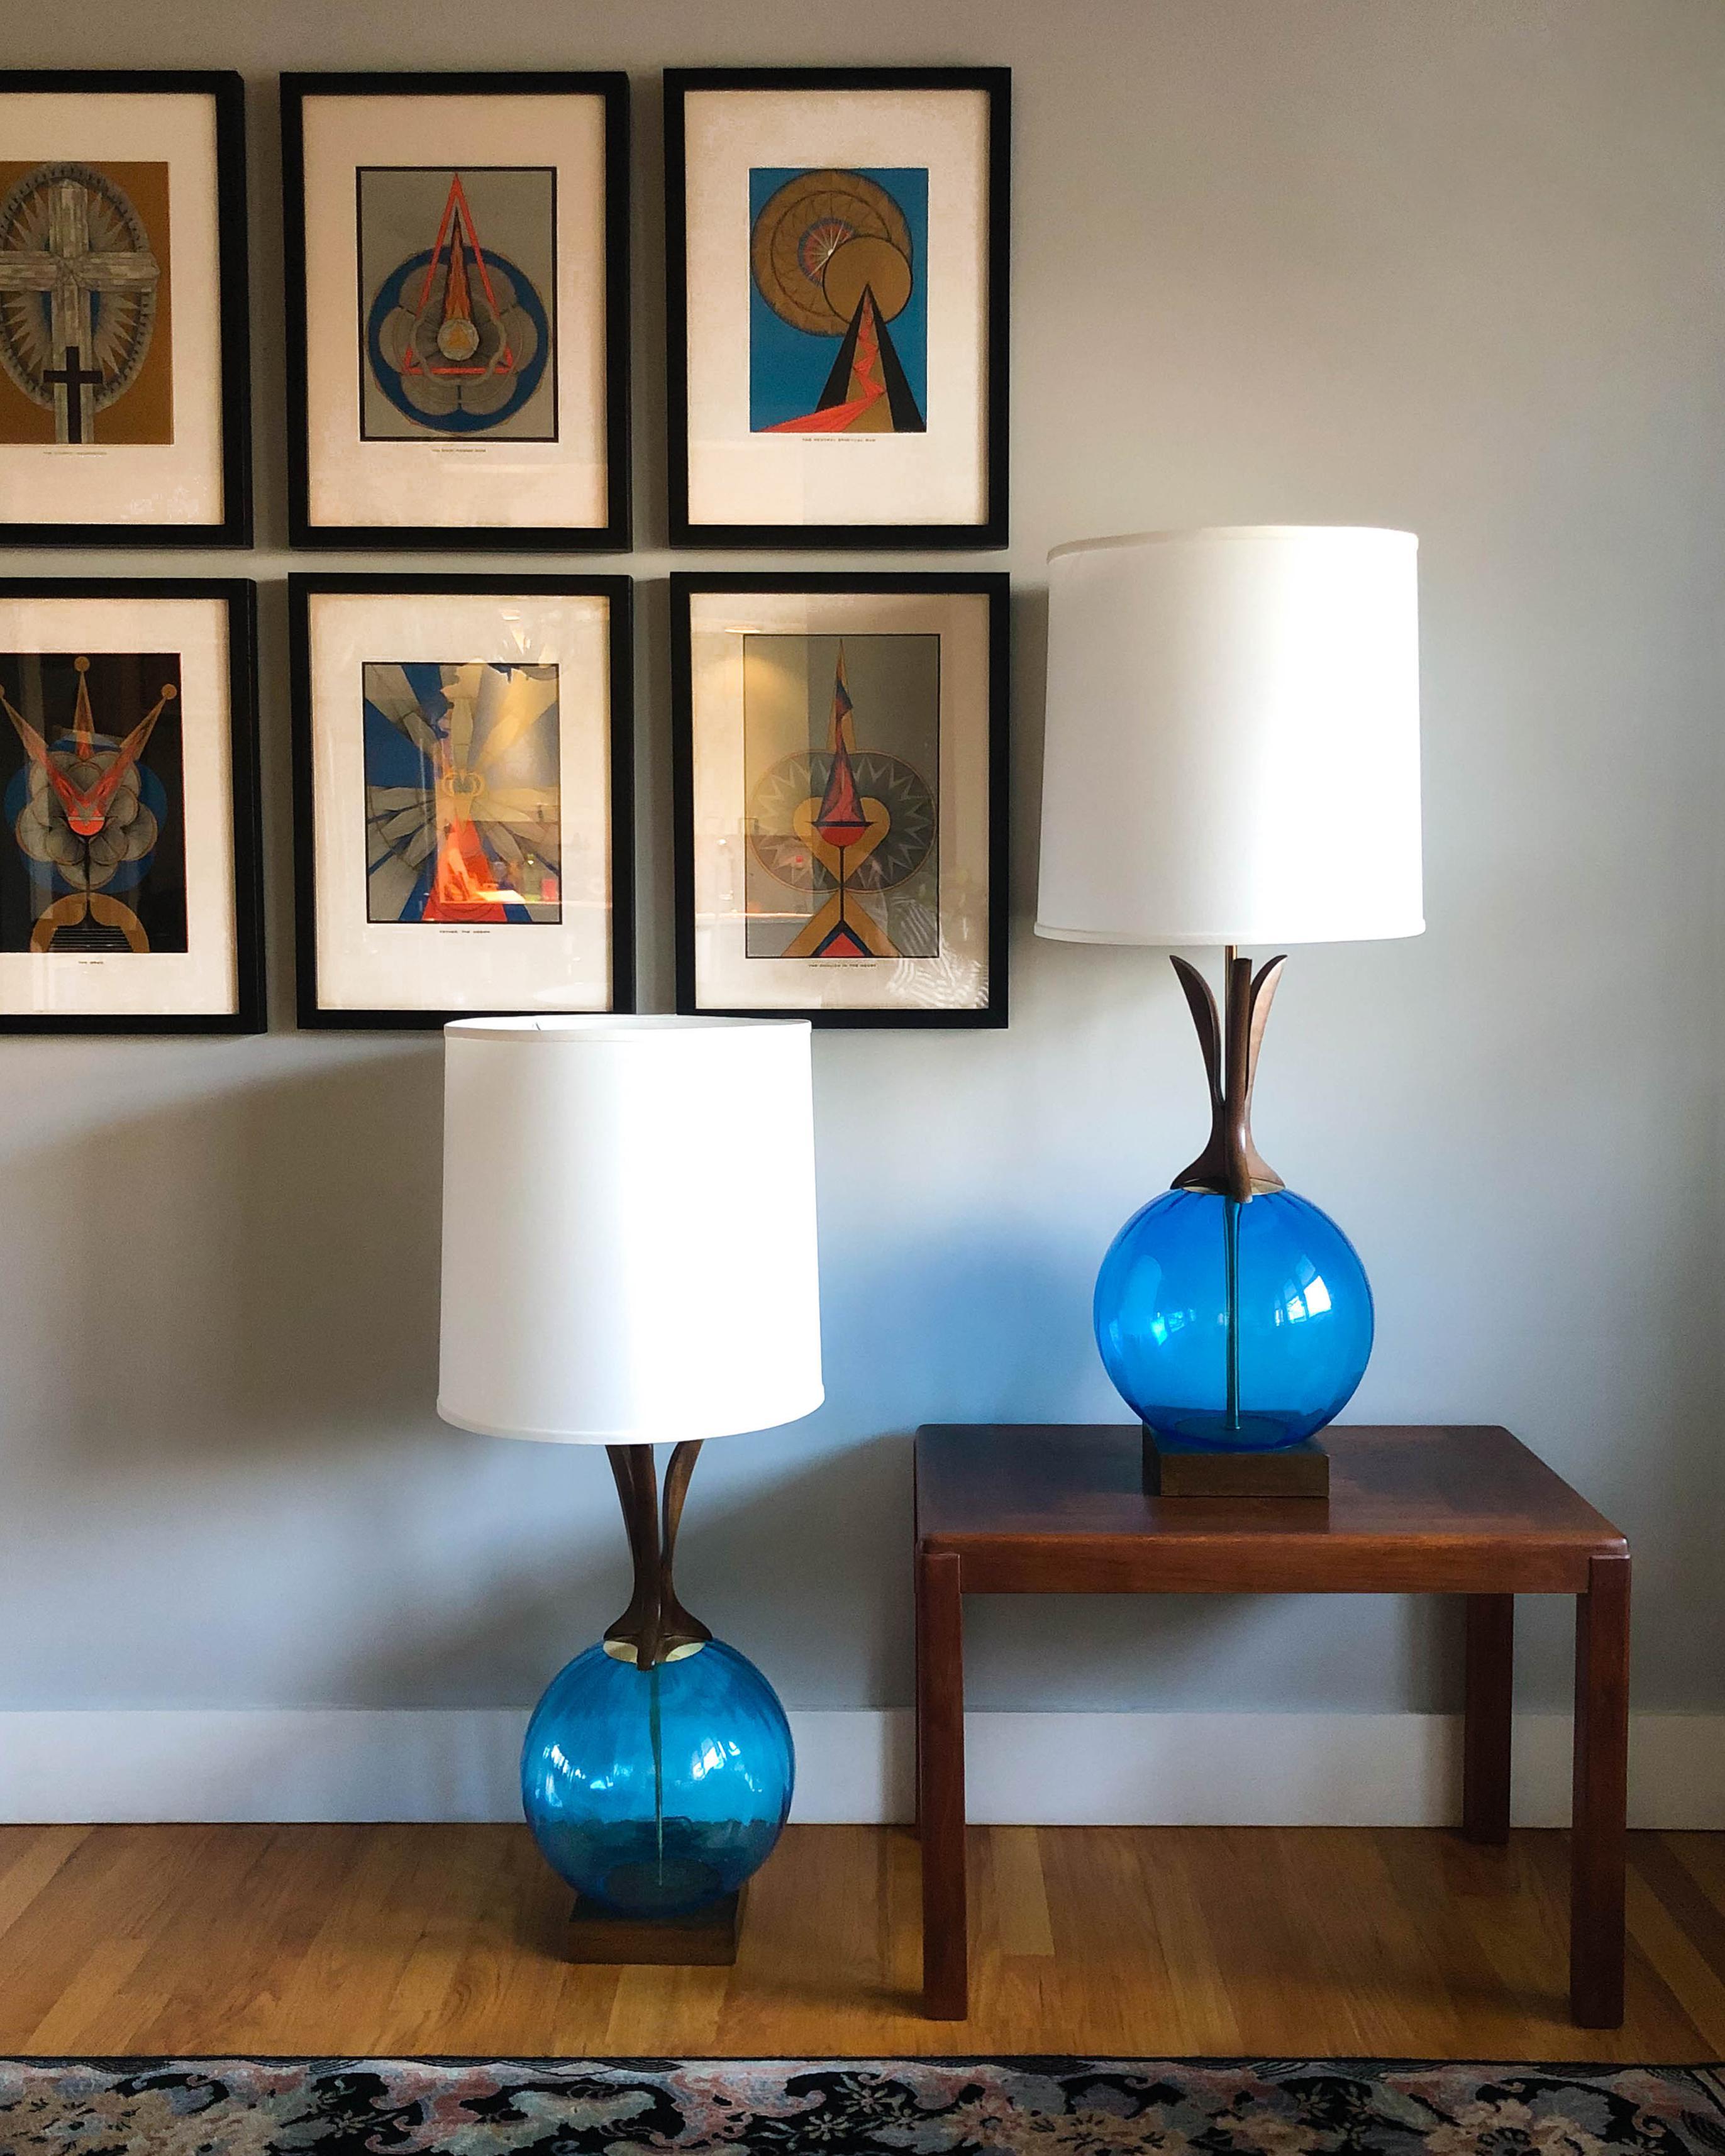 Pair of large, vintage walnut and blown glass table lamps, made in Denmark with an Adrian Pearsall / Modeline aesthetic. Shades not included.
Measures: 26” tall to top of socket
11” at widest
Base is 7” square.